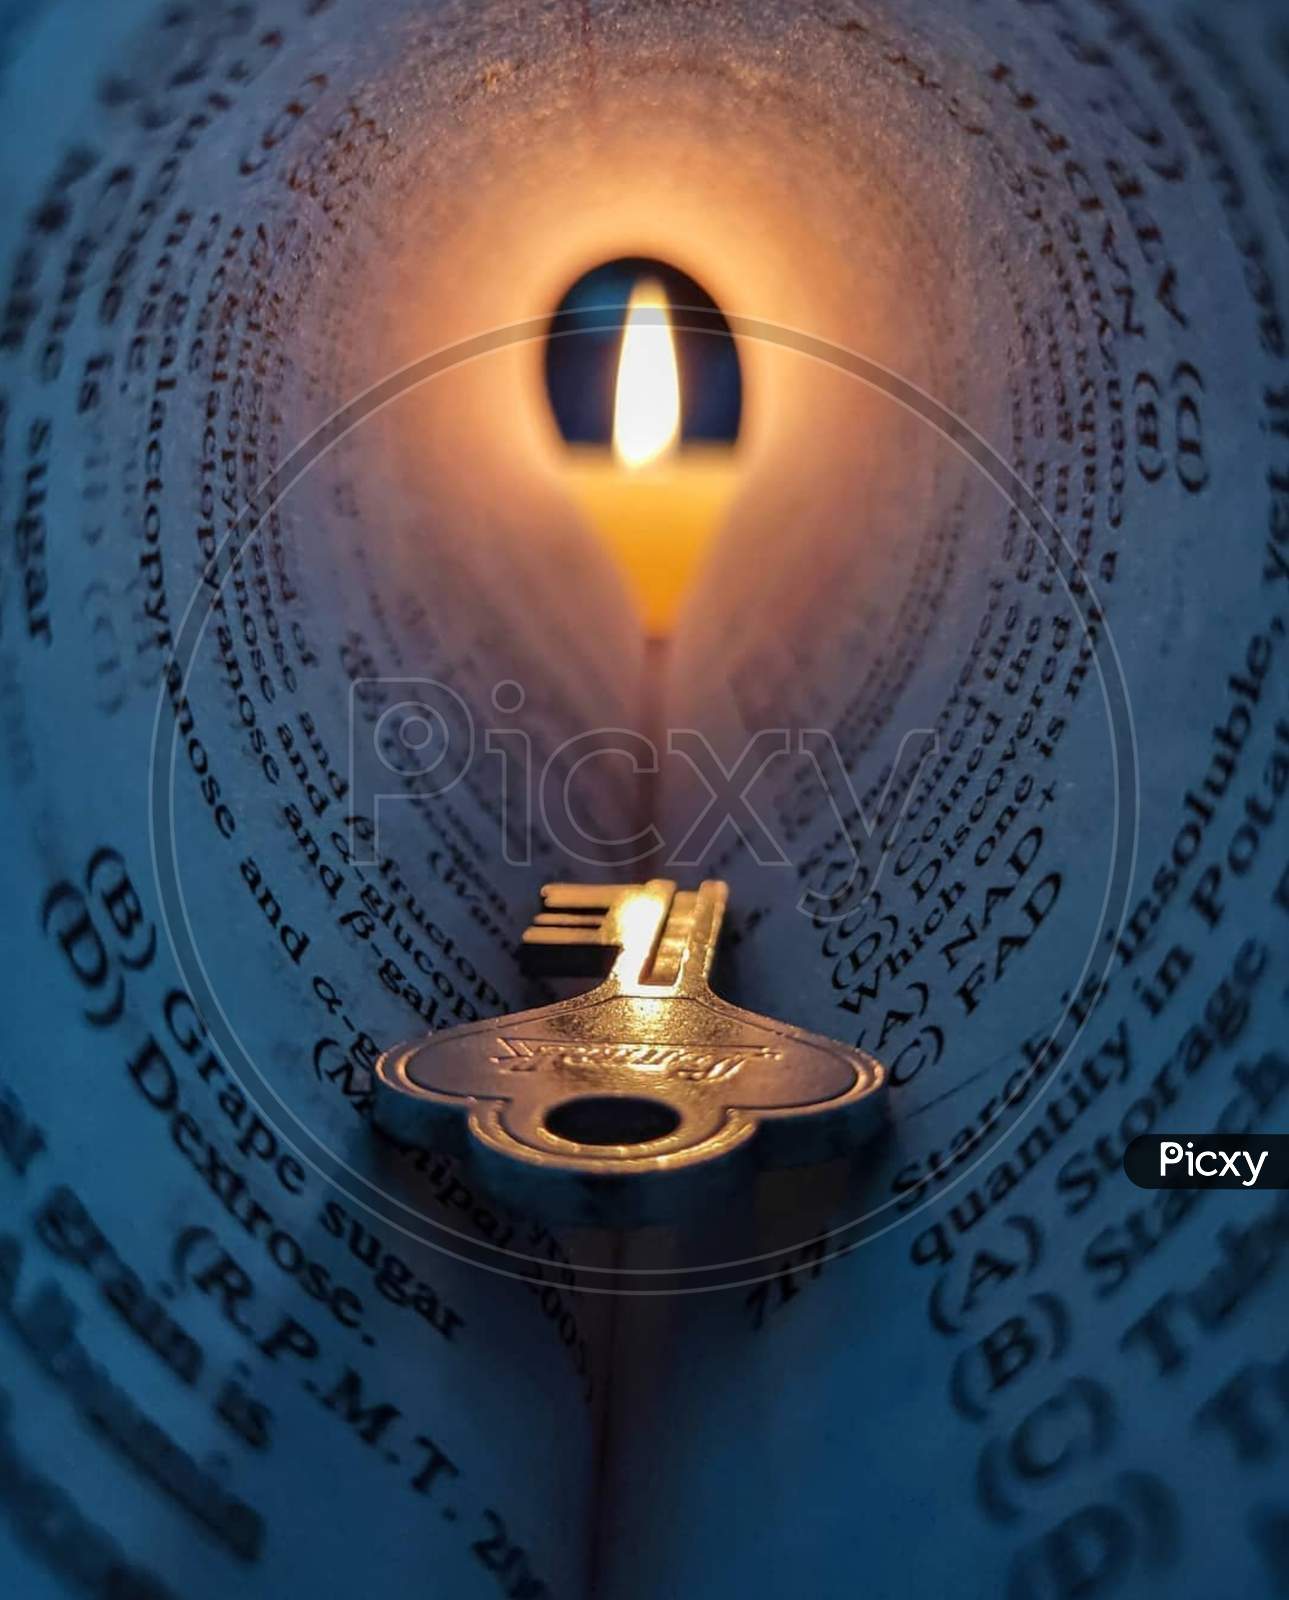 Very beautiful creation by using a key, candle and a rolled paper